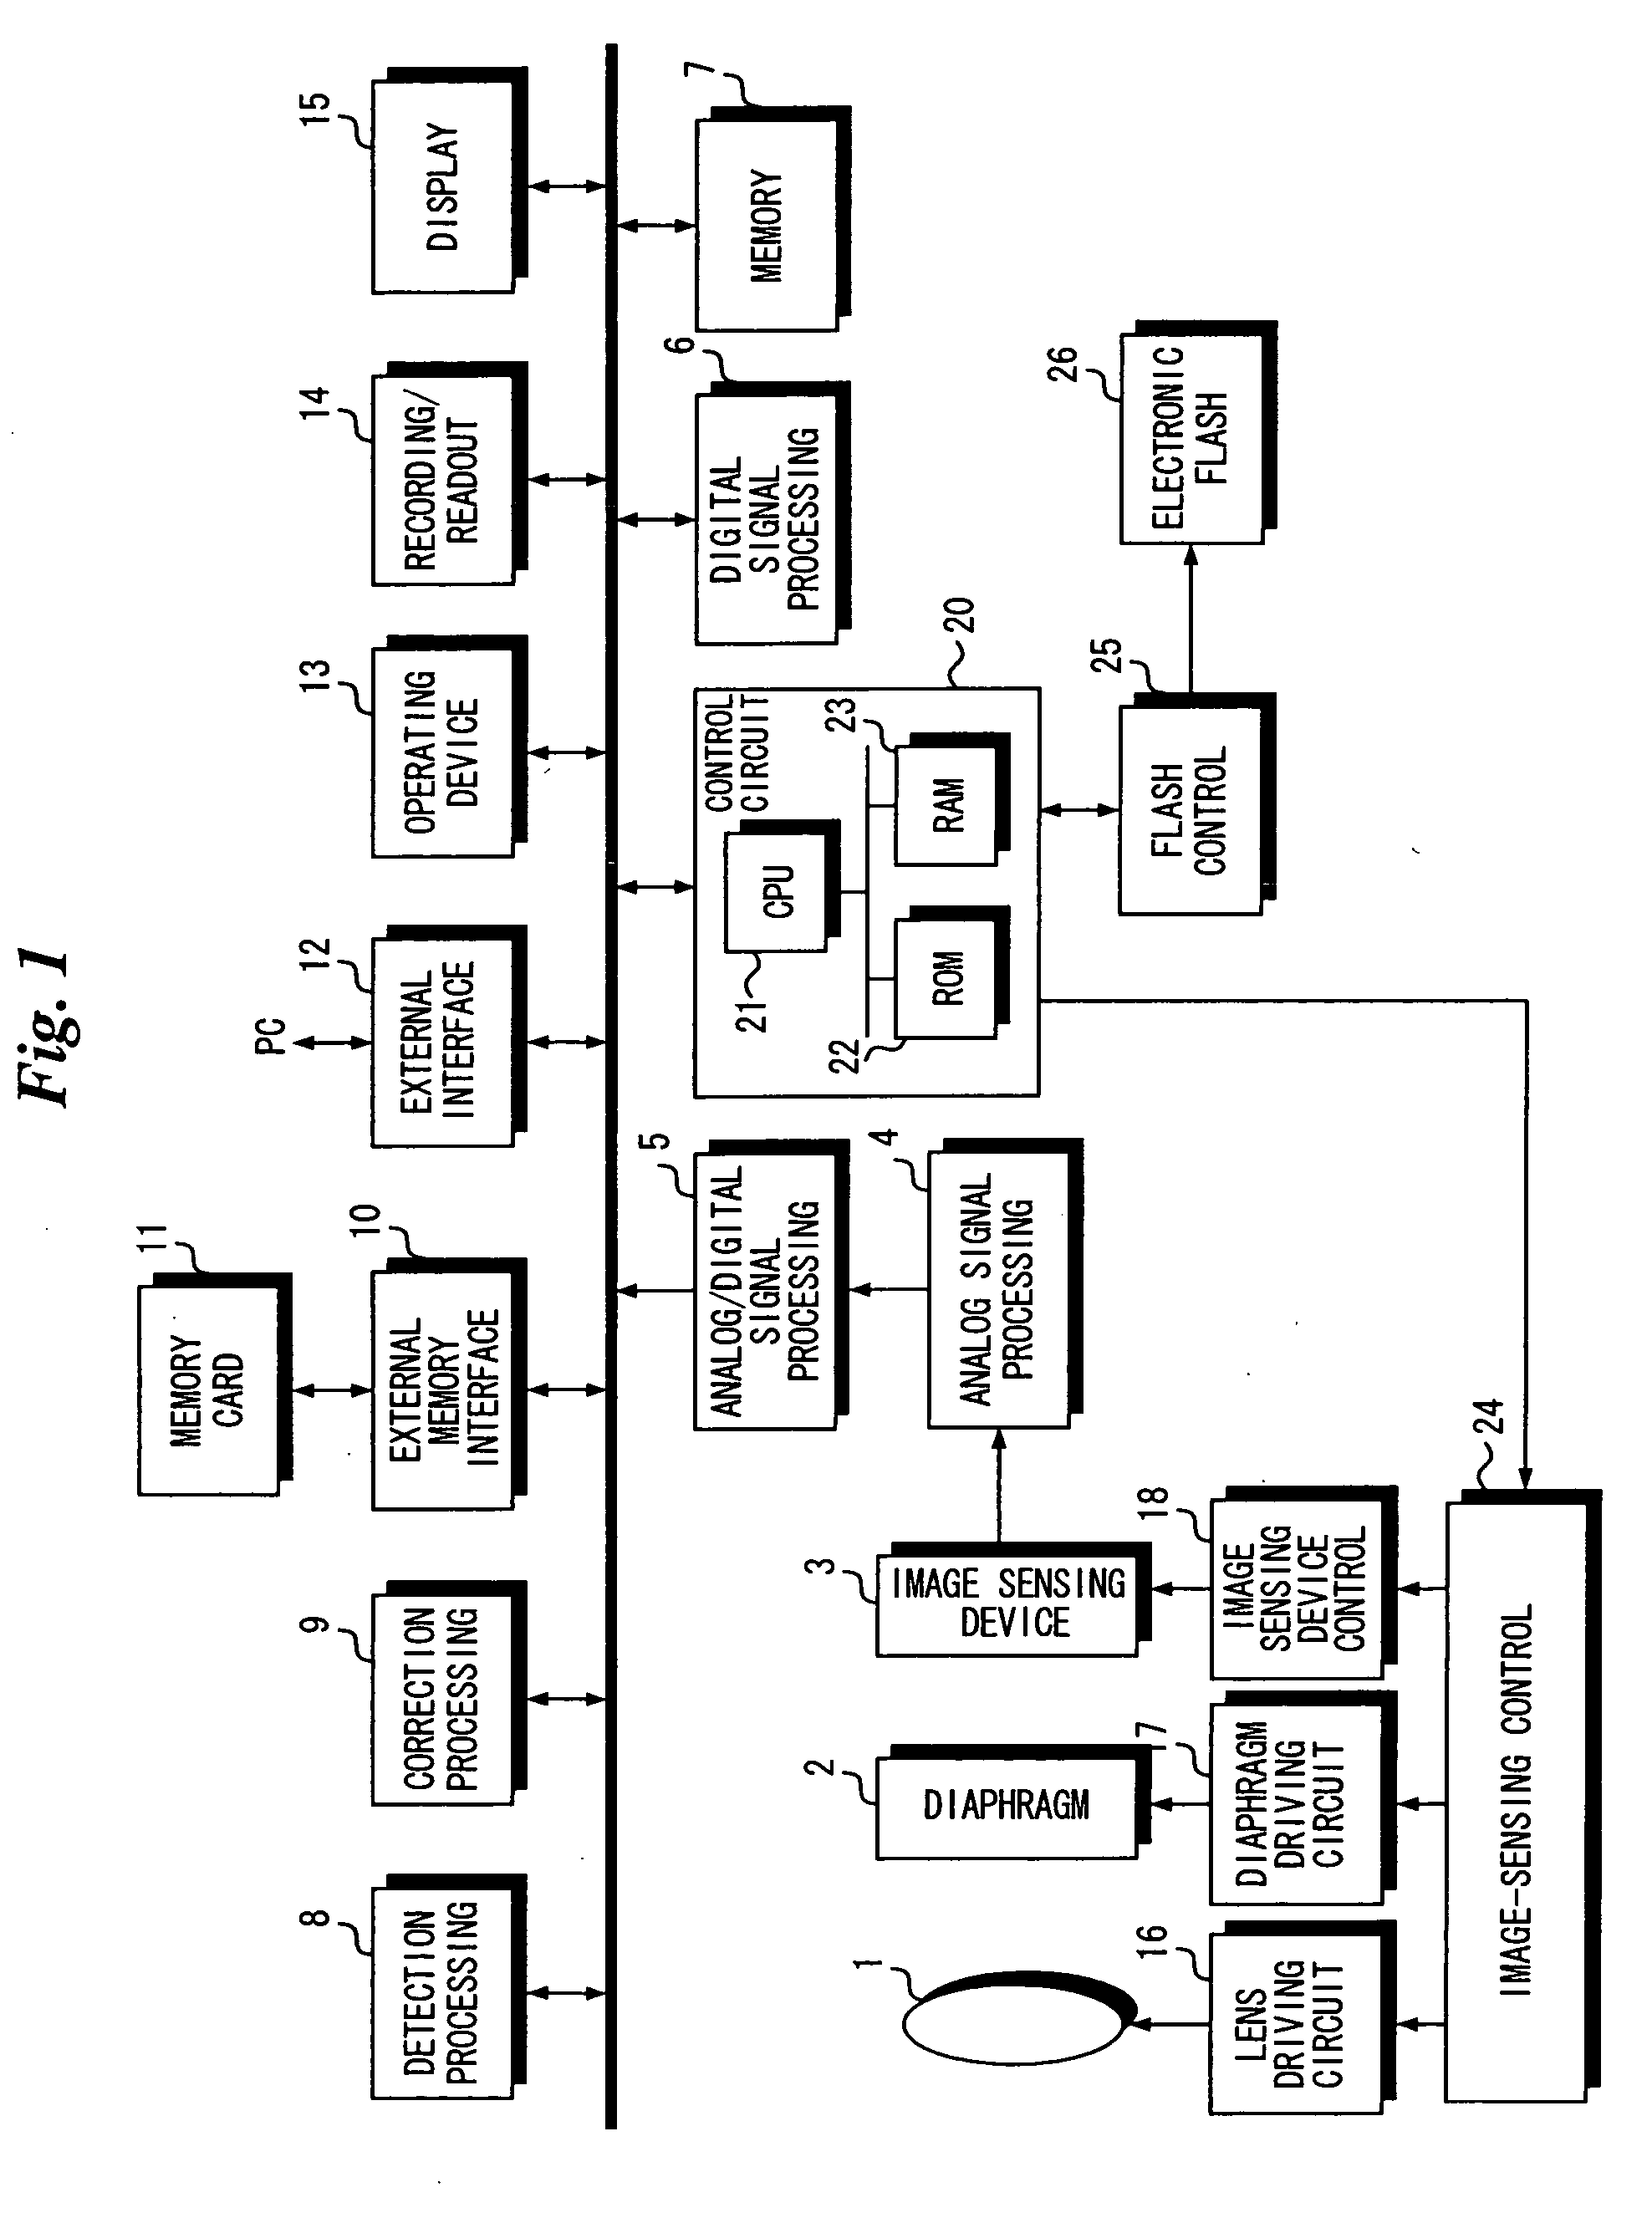 Image correction apparatus and method of controlling same